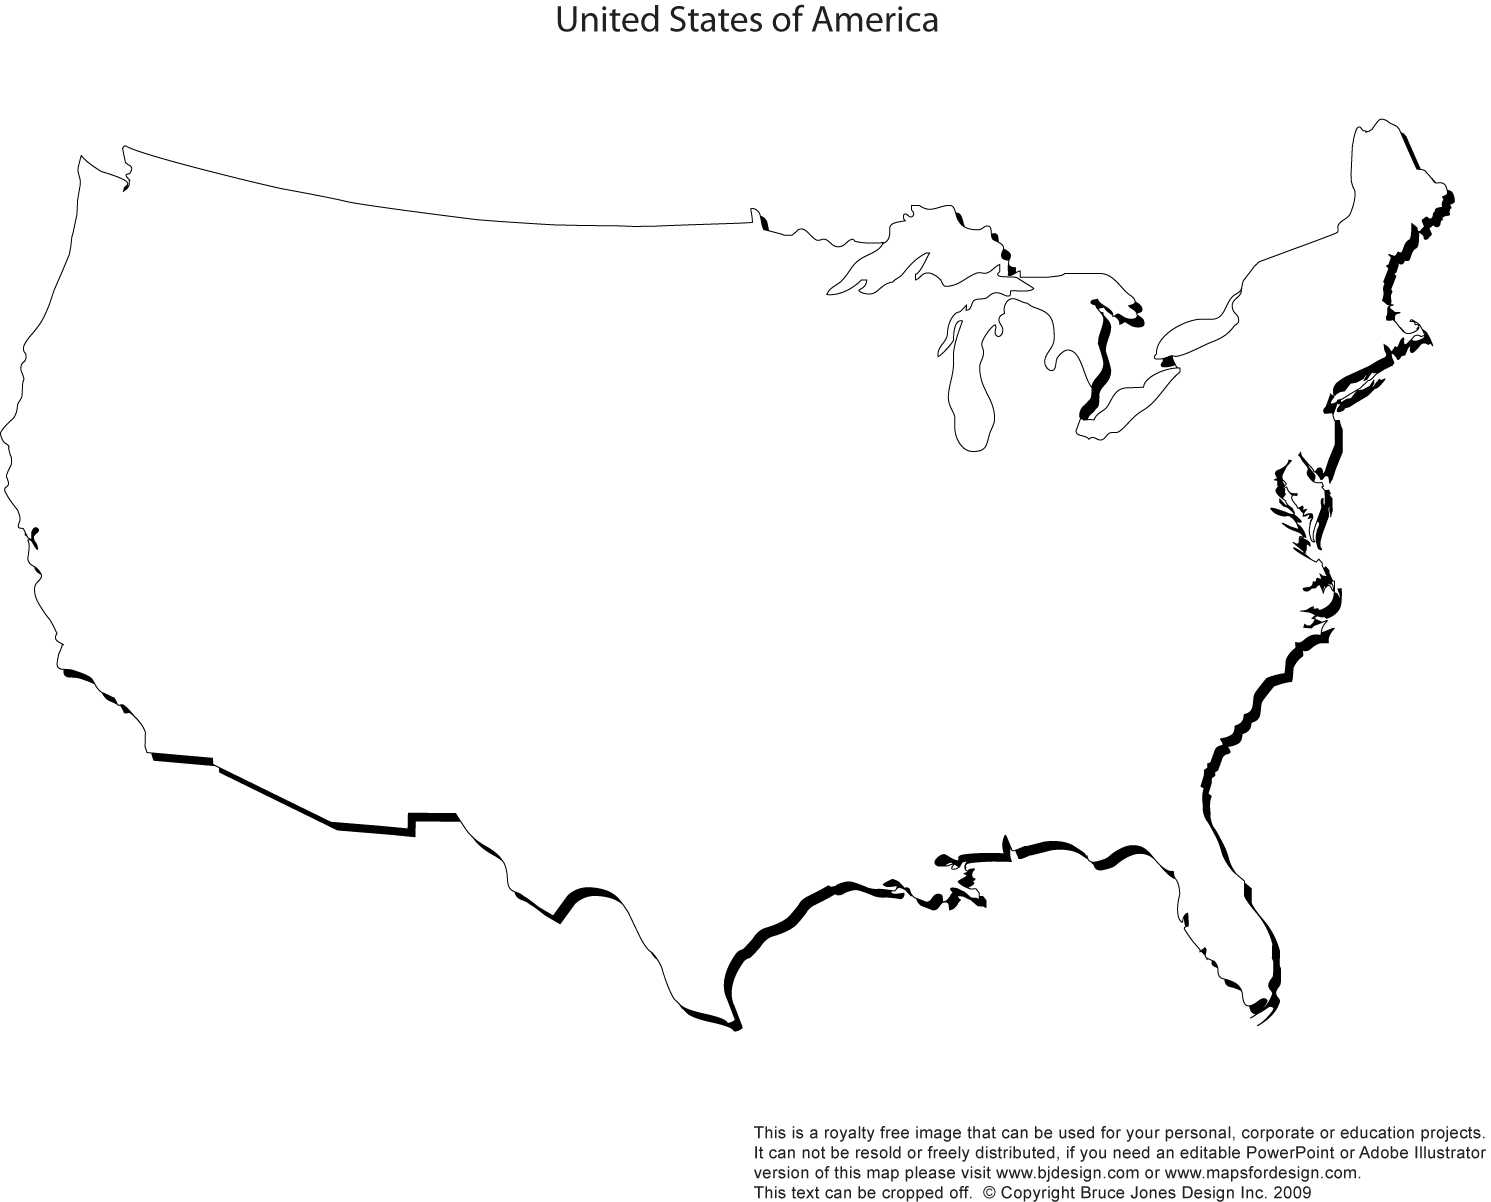 Legible North America Map No Borders United State Map With Intended For Blank Template Of The United States